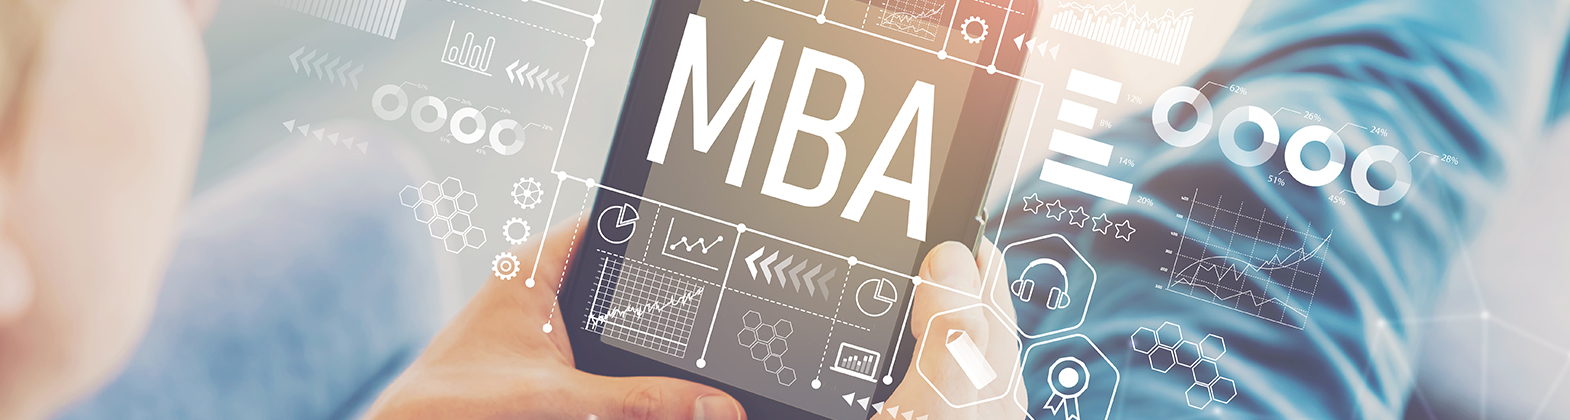 MBA CouMBA Courses - Get a Greater Sense of Confidencerses - Get a Greater Sense of Confidence